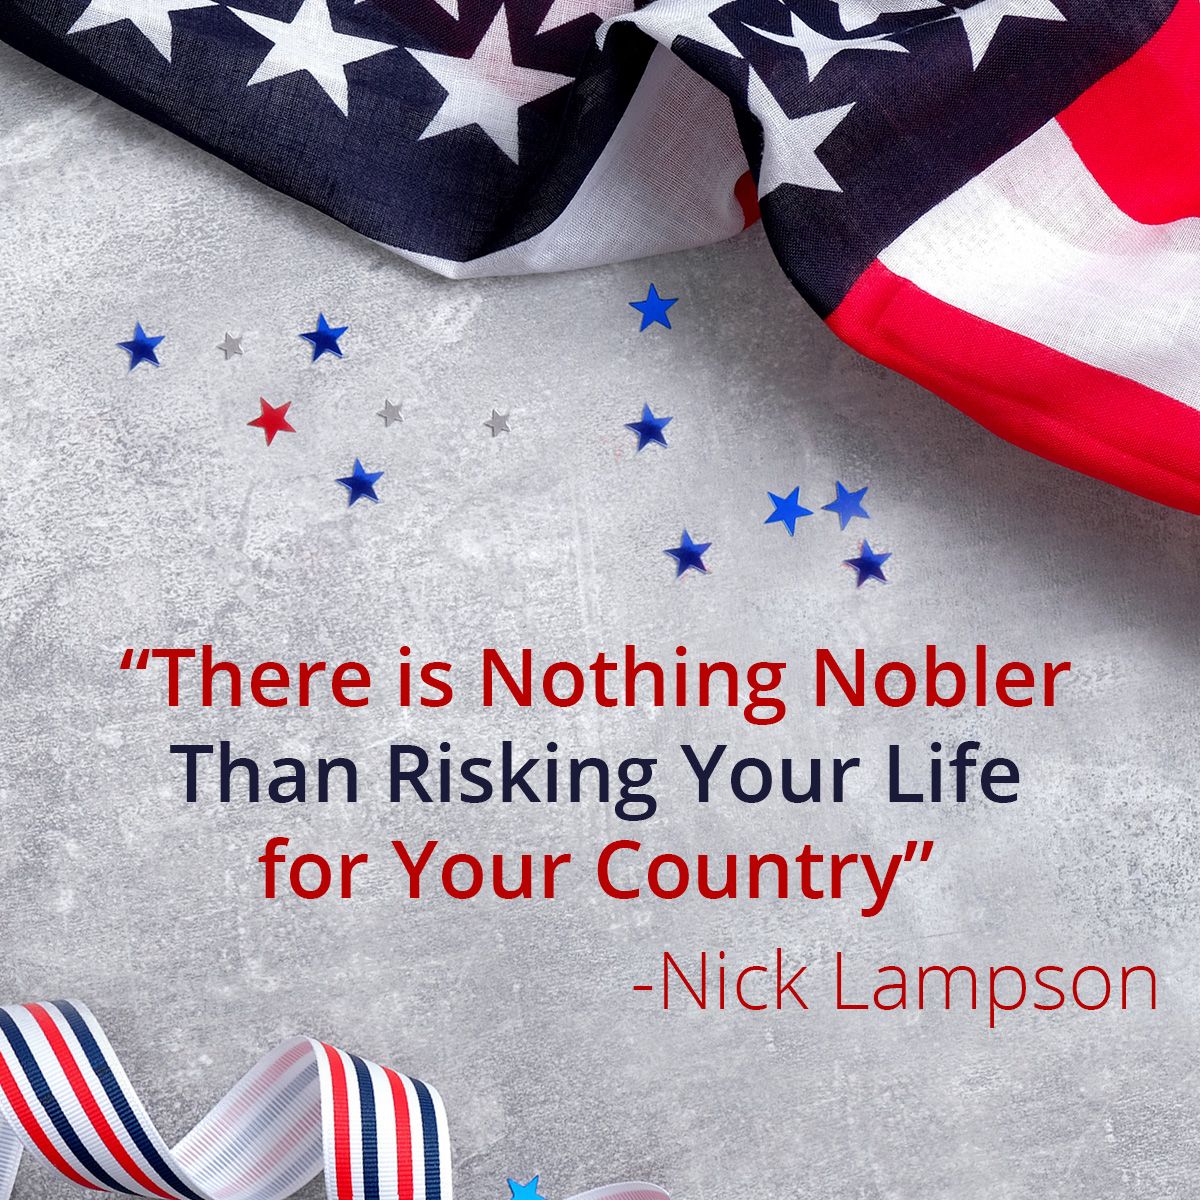 There is Nothing Nobler Than Risking Your Life for Your Country